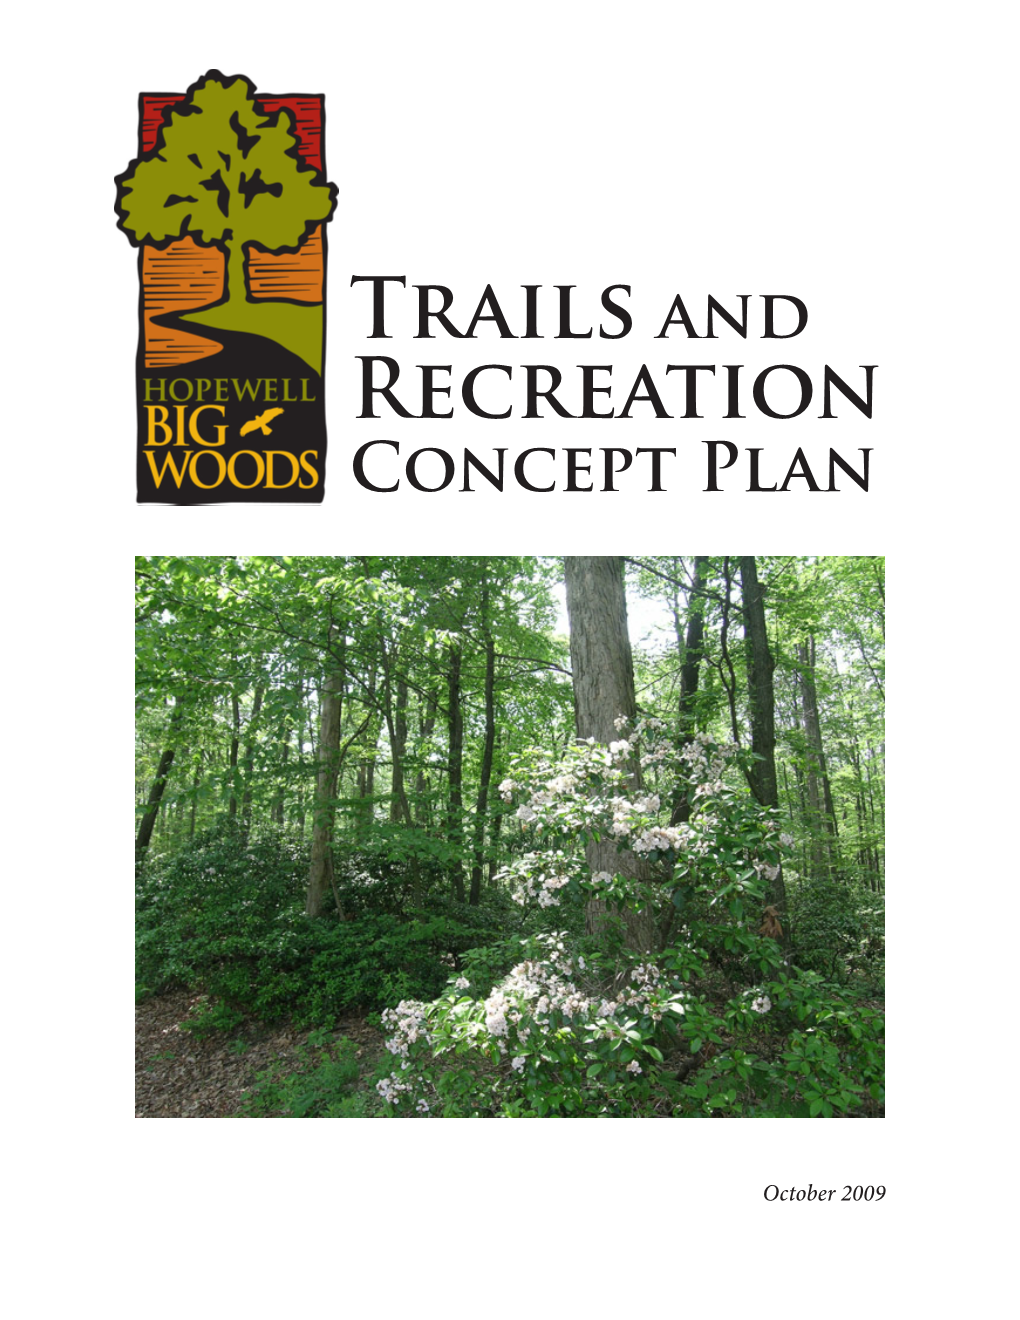 Hopewell Big Woods Trails and Recreation Concept Plan Were Supported by the National Park Service’S Challenge Cost Share Grant Program